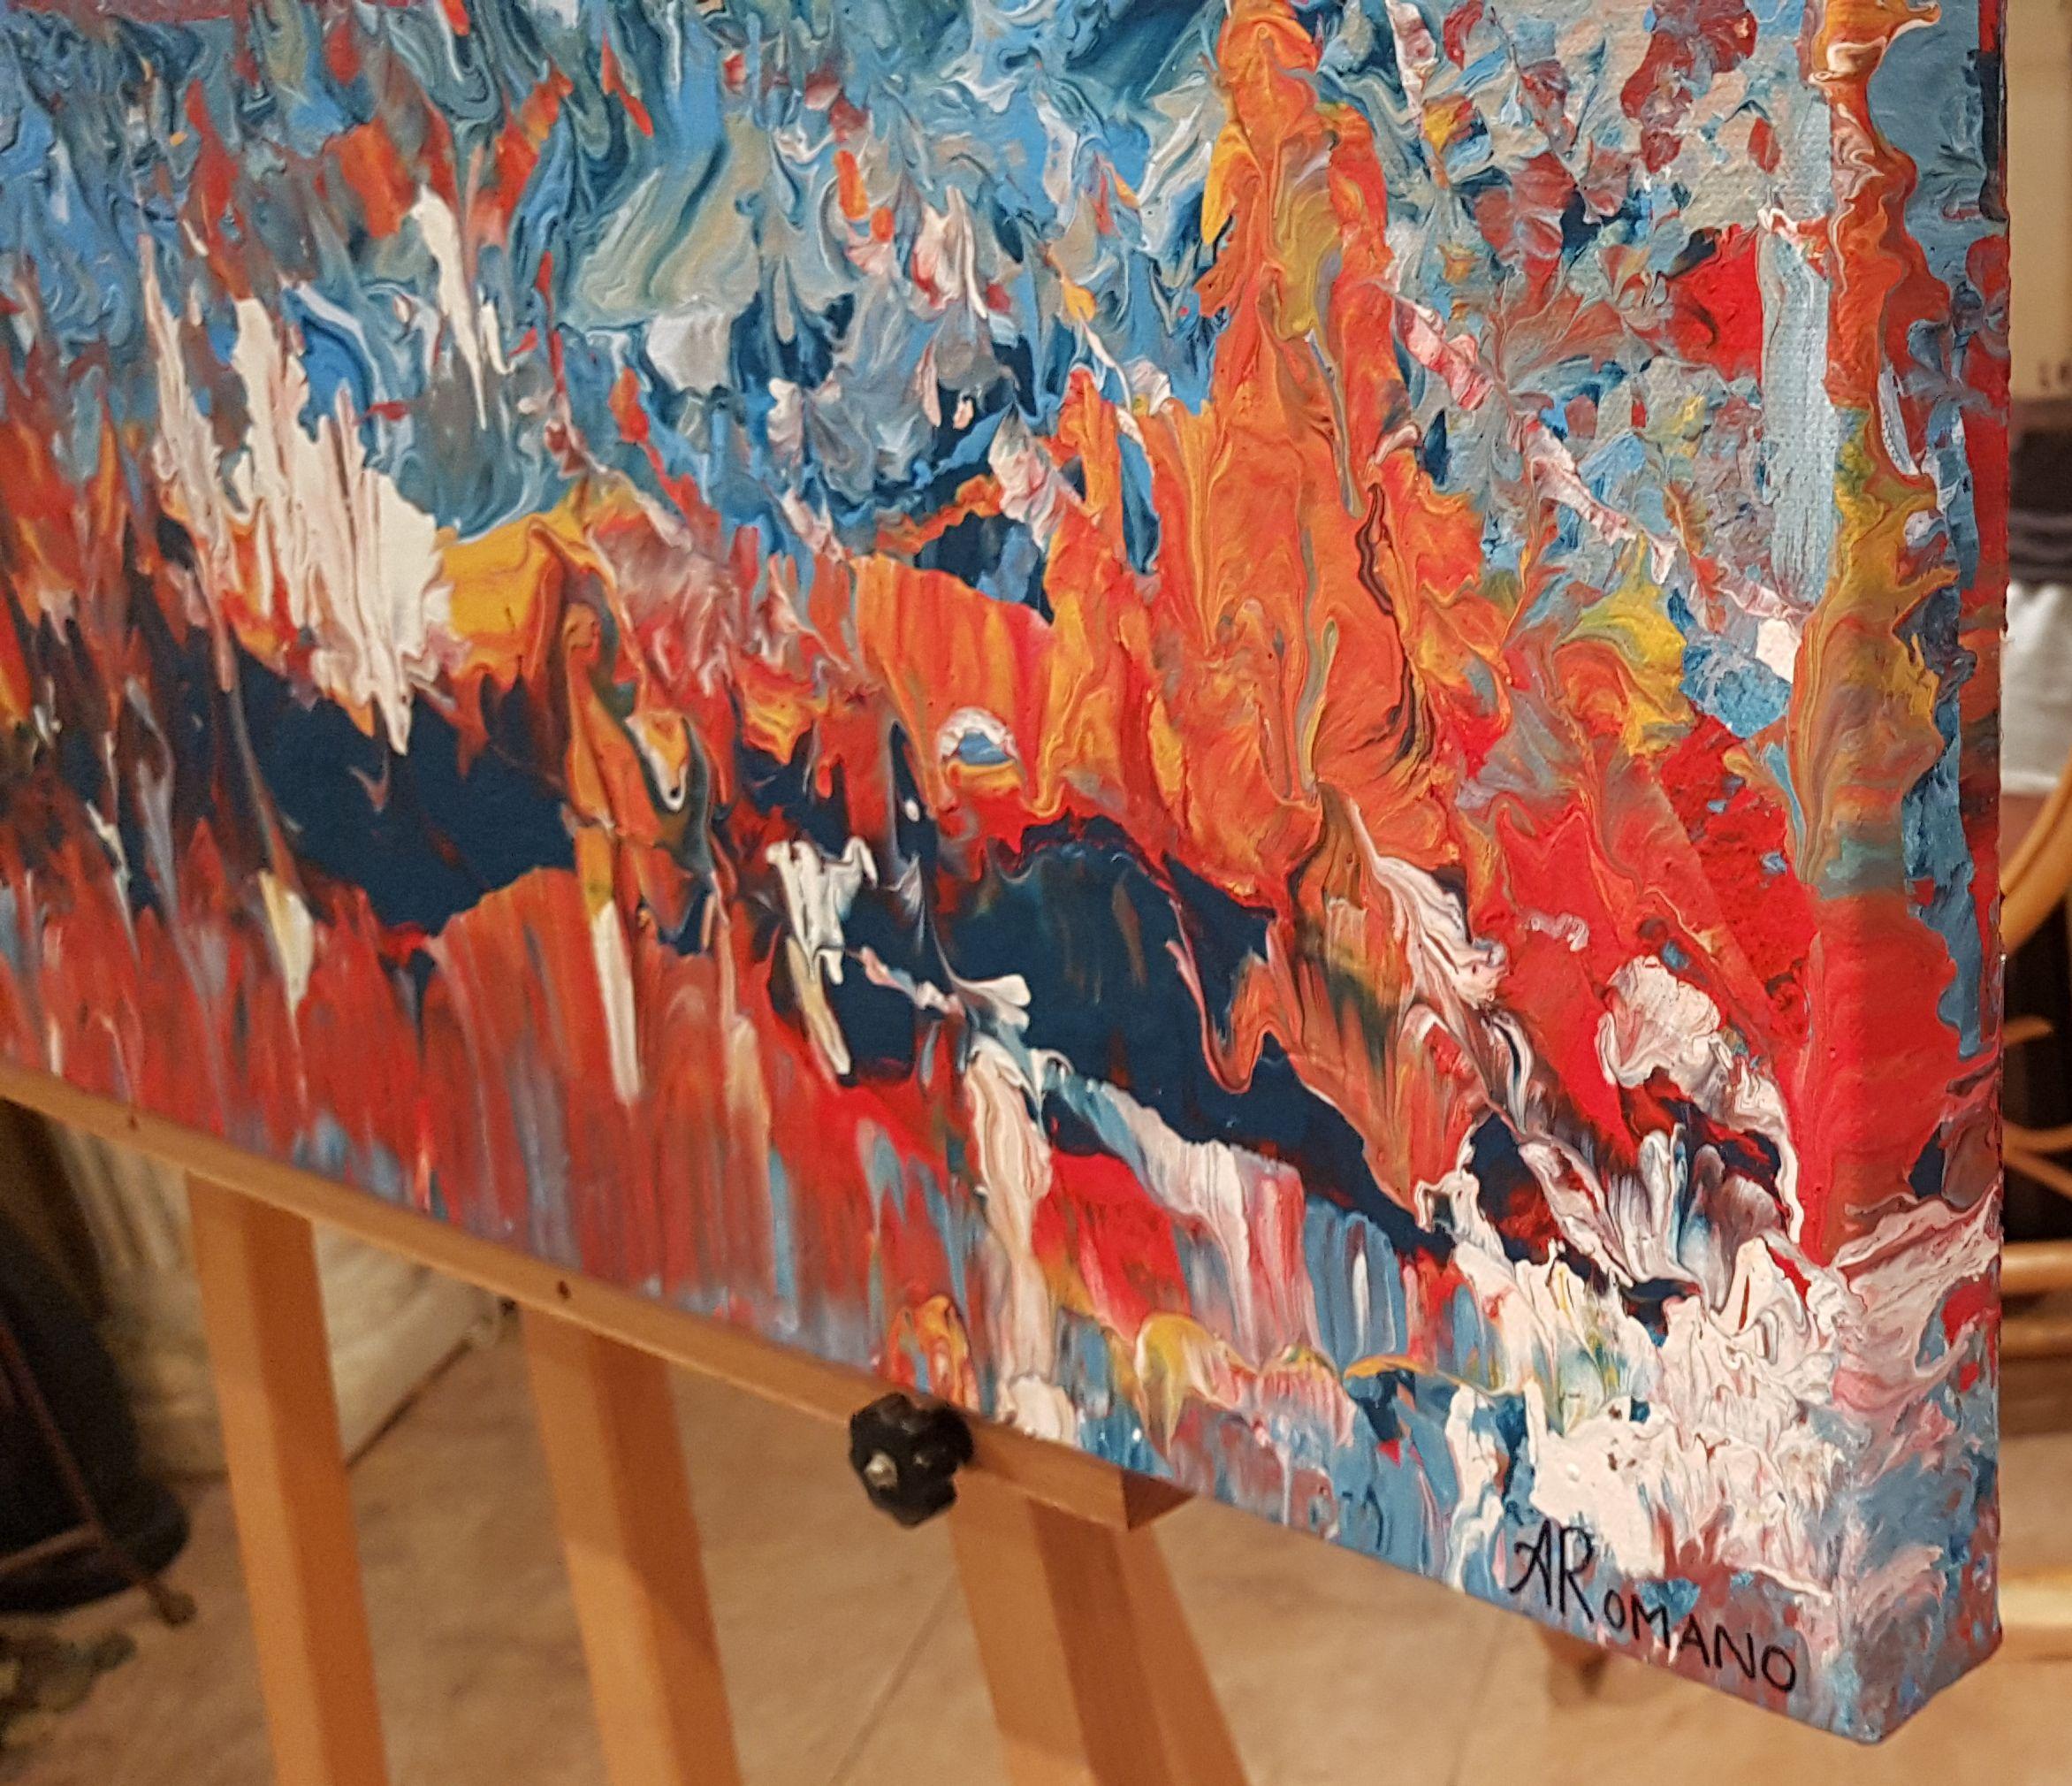 A beautiful abstract with flowing movement, texture, and a unique juxtaposition of white, blue, and complementary red and orange hues. The unique piece symbolizes how our lives change as seasons change. 